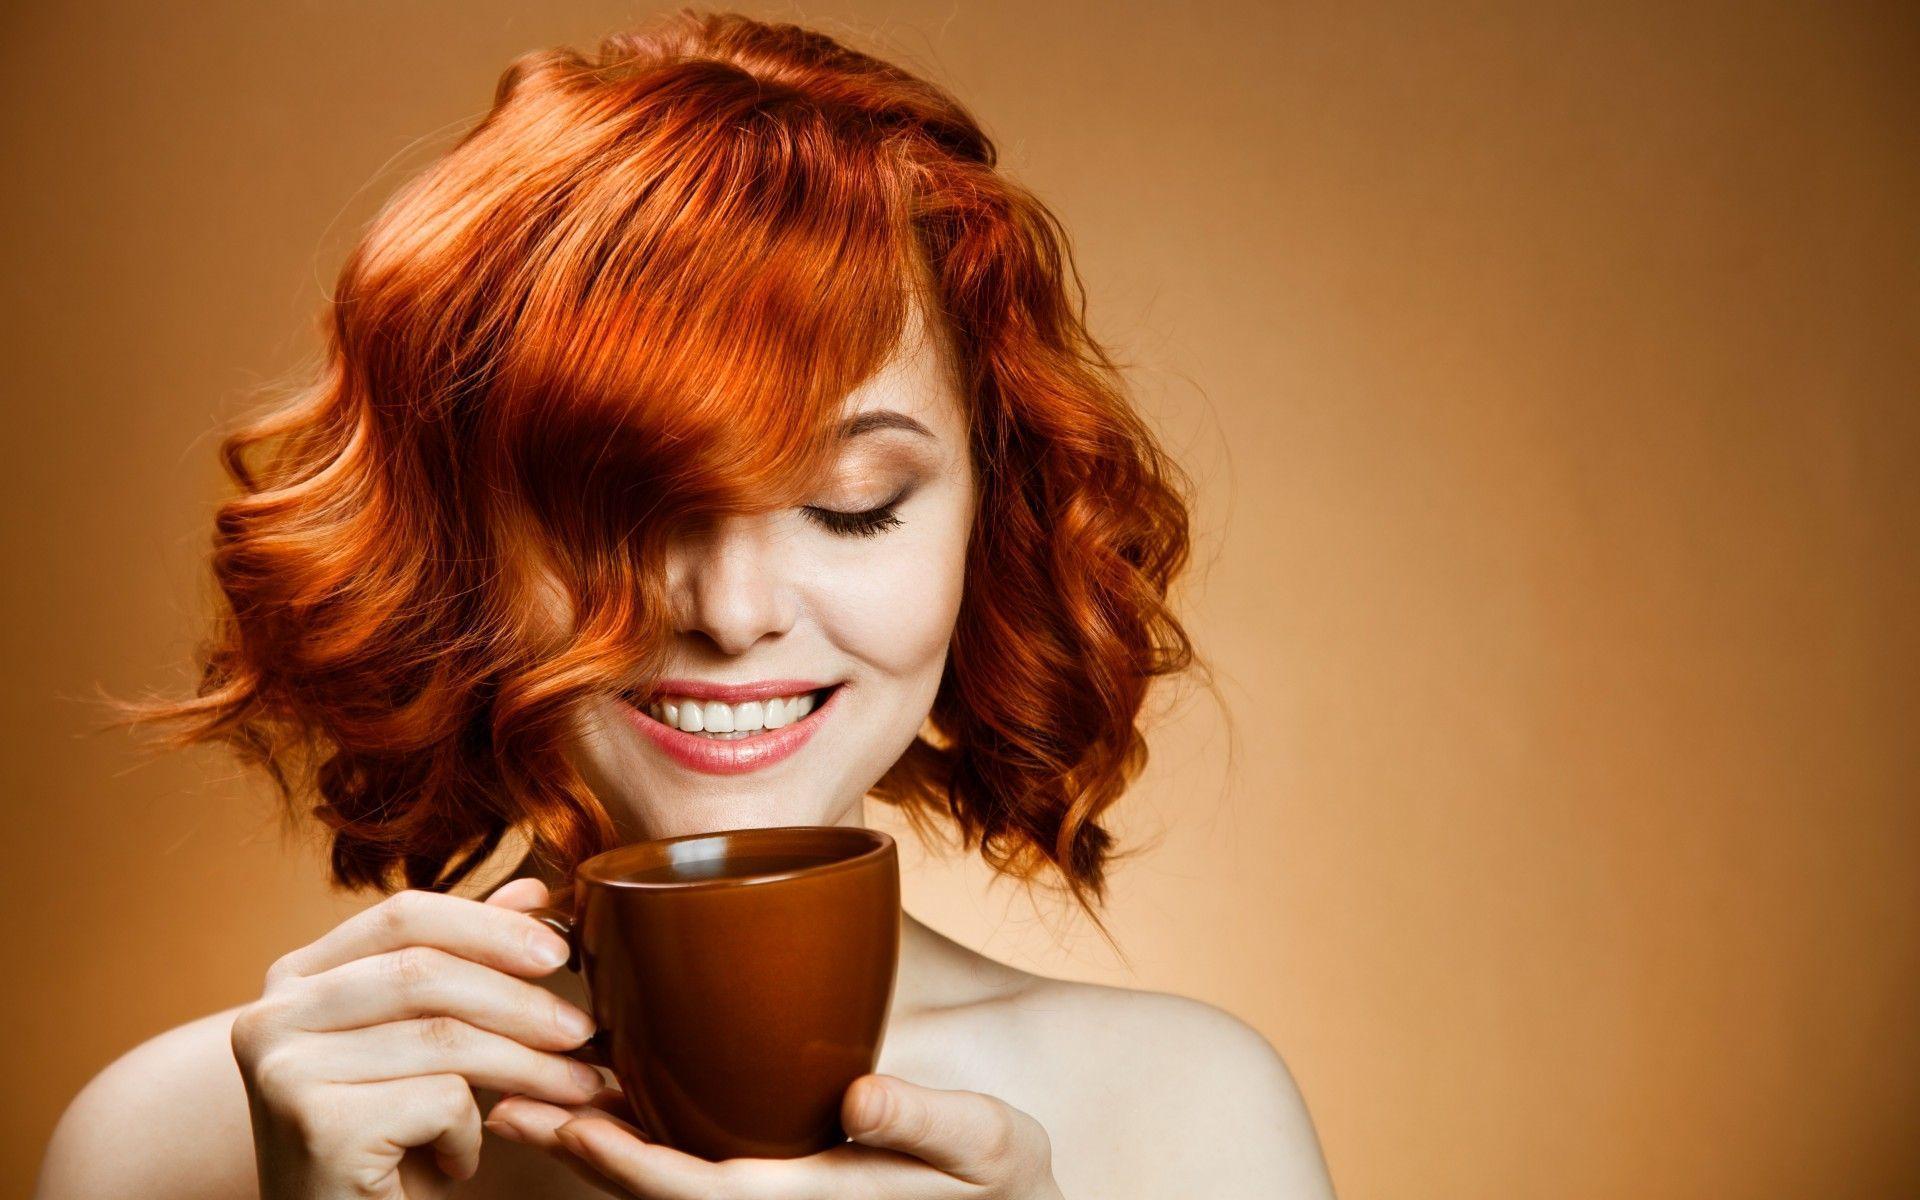 Smile Hair Coffee Cup Drink Face Mood Women Models Females Girls